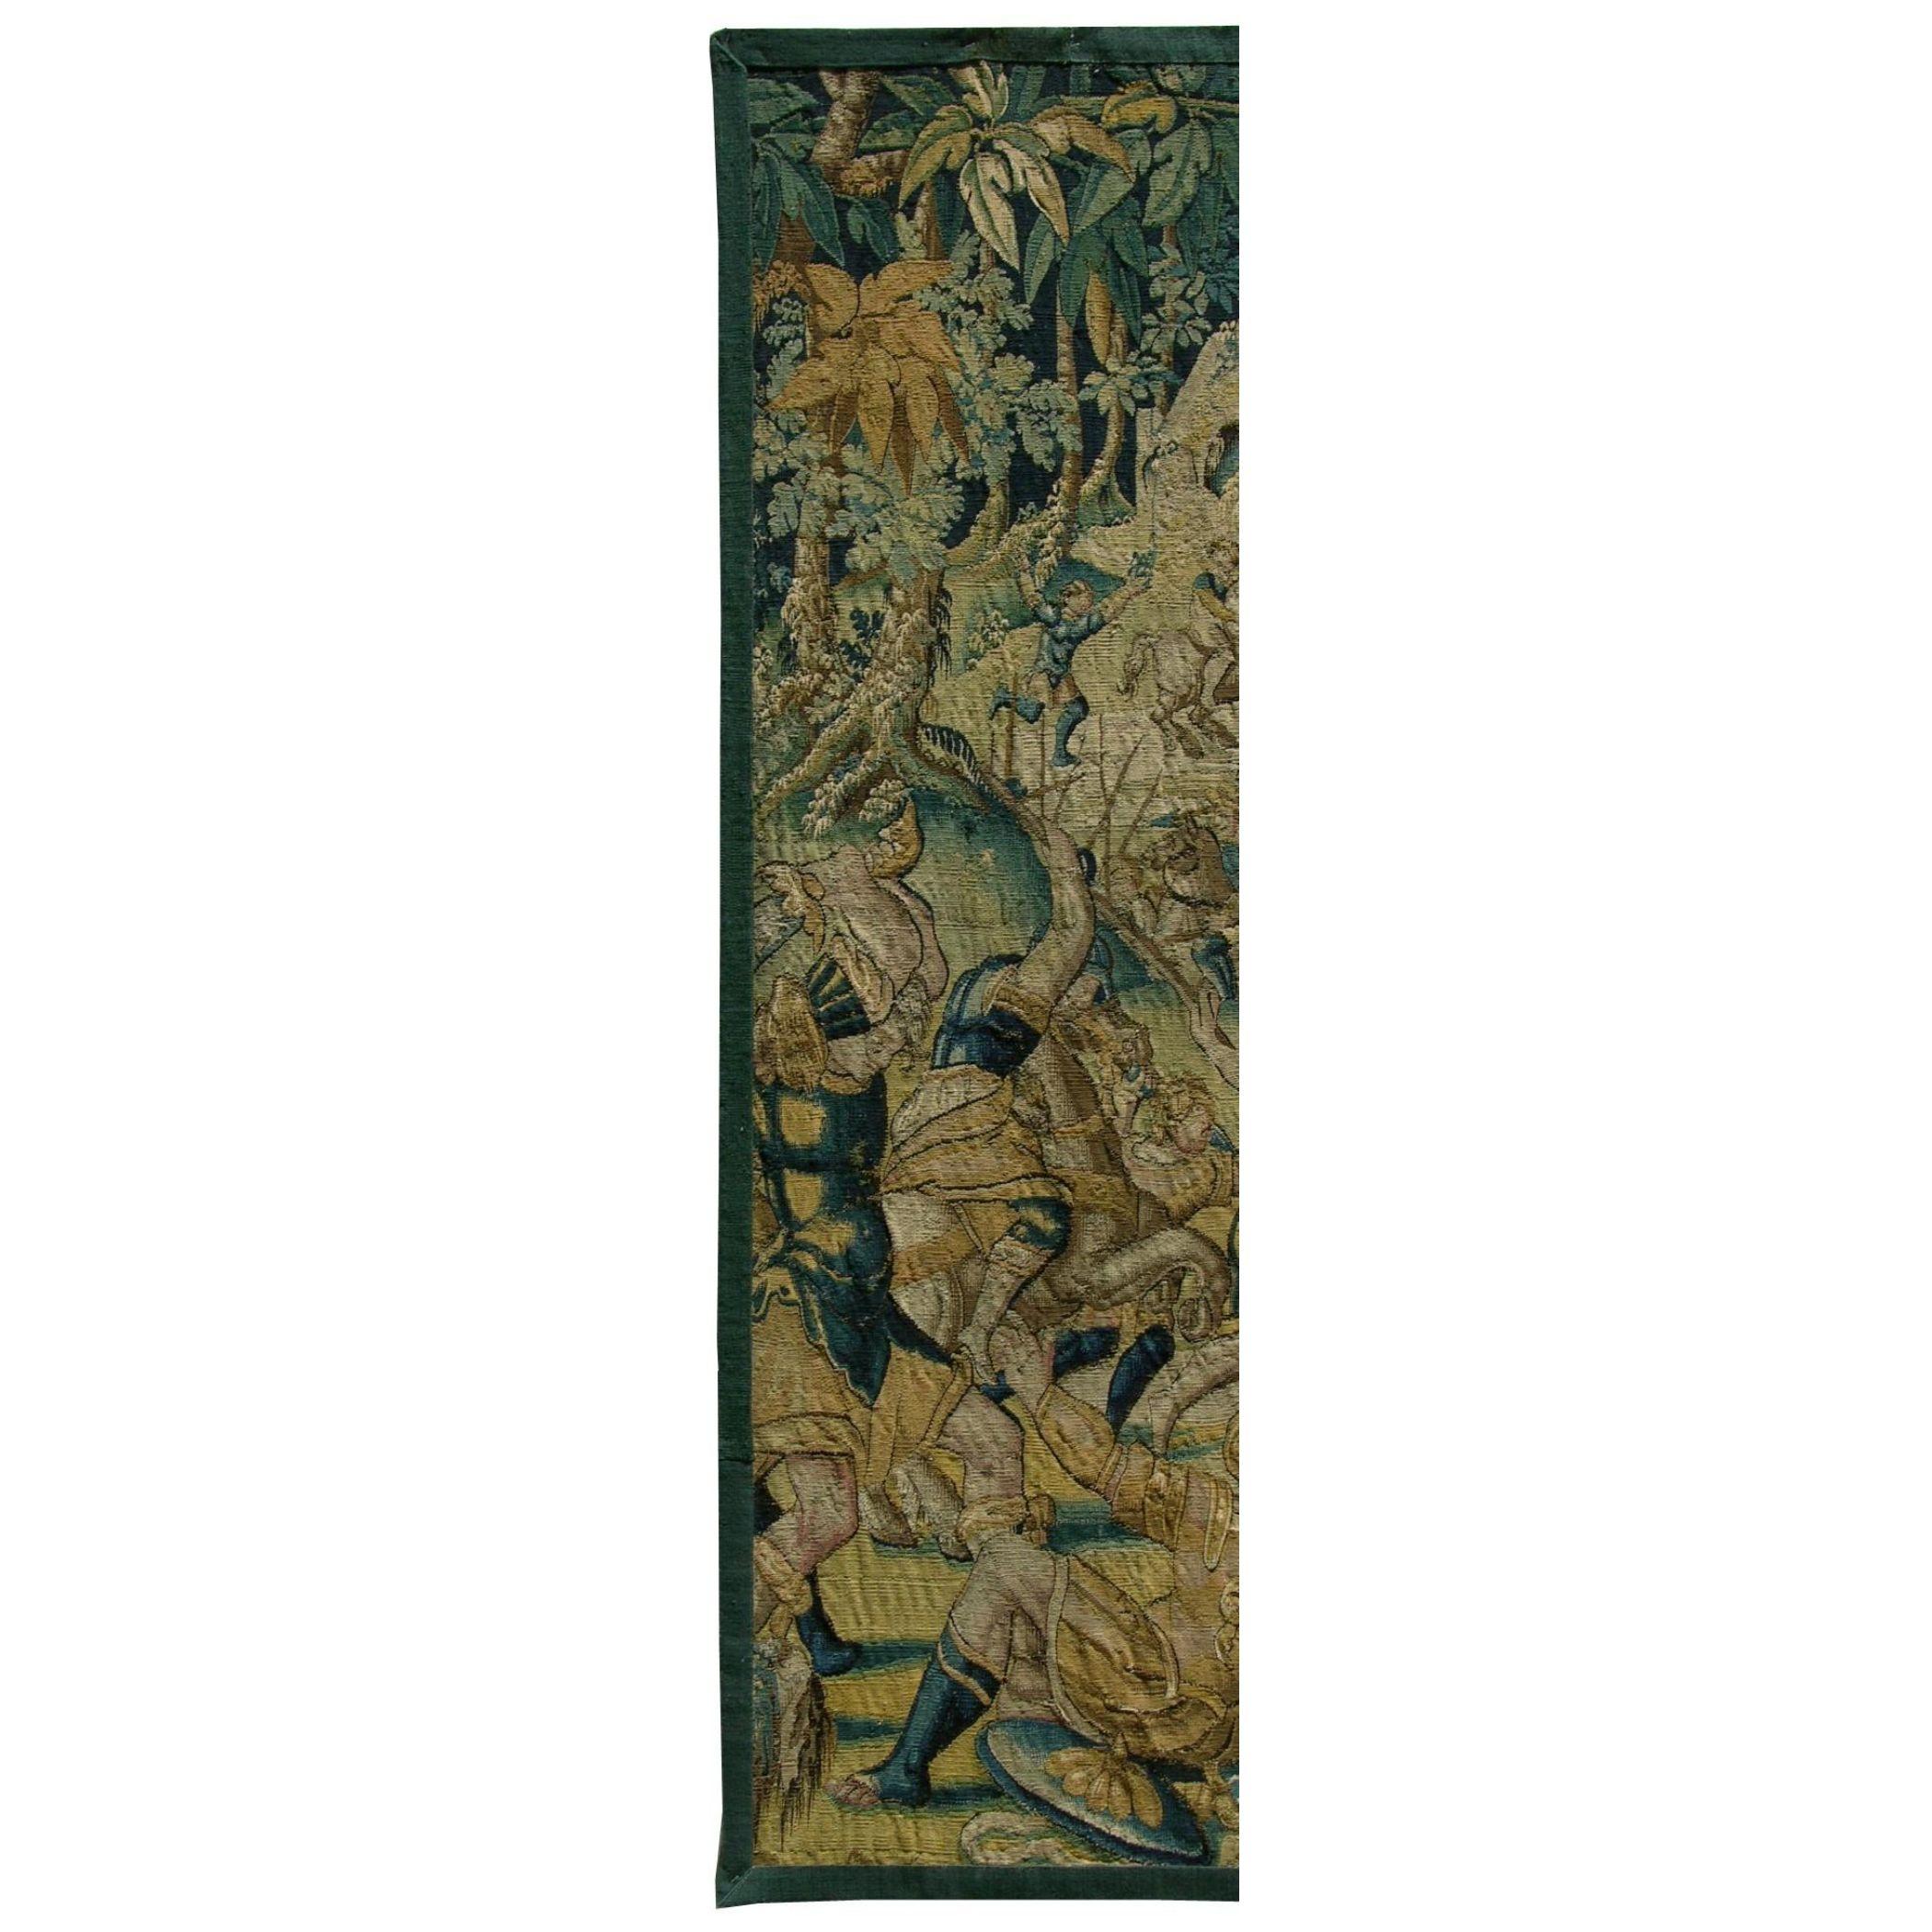 Unknown 17th Century Antique Flemish Tapestry 6'8